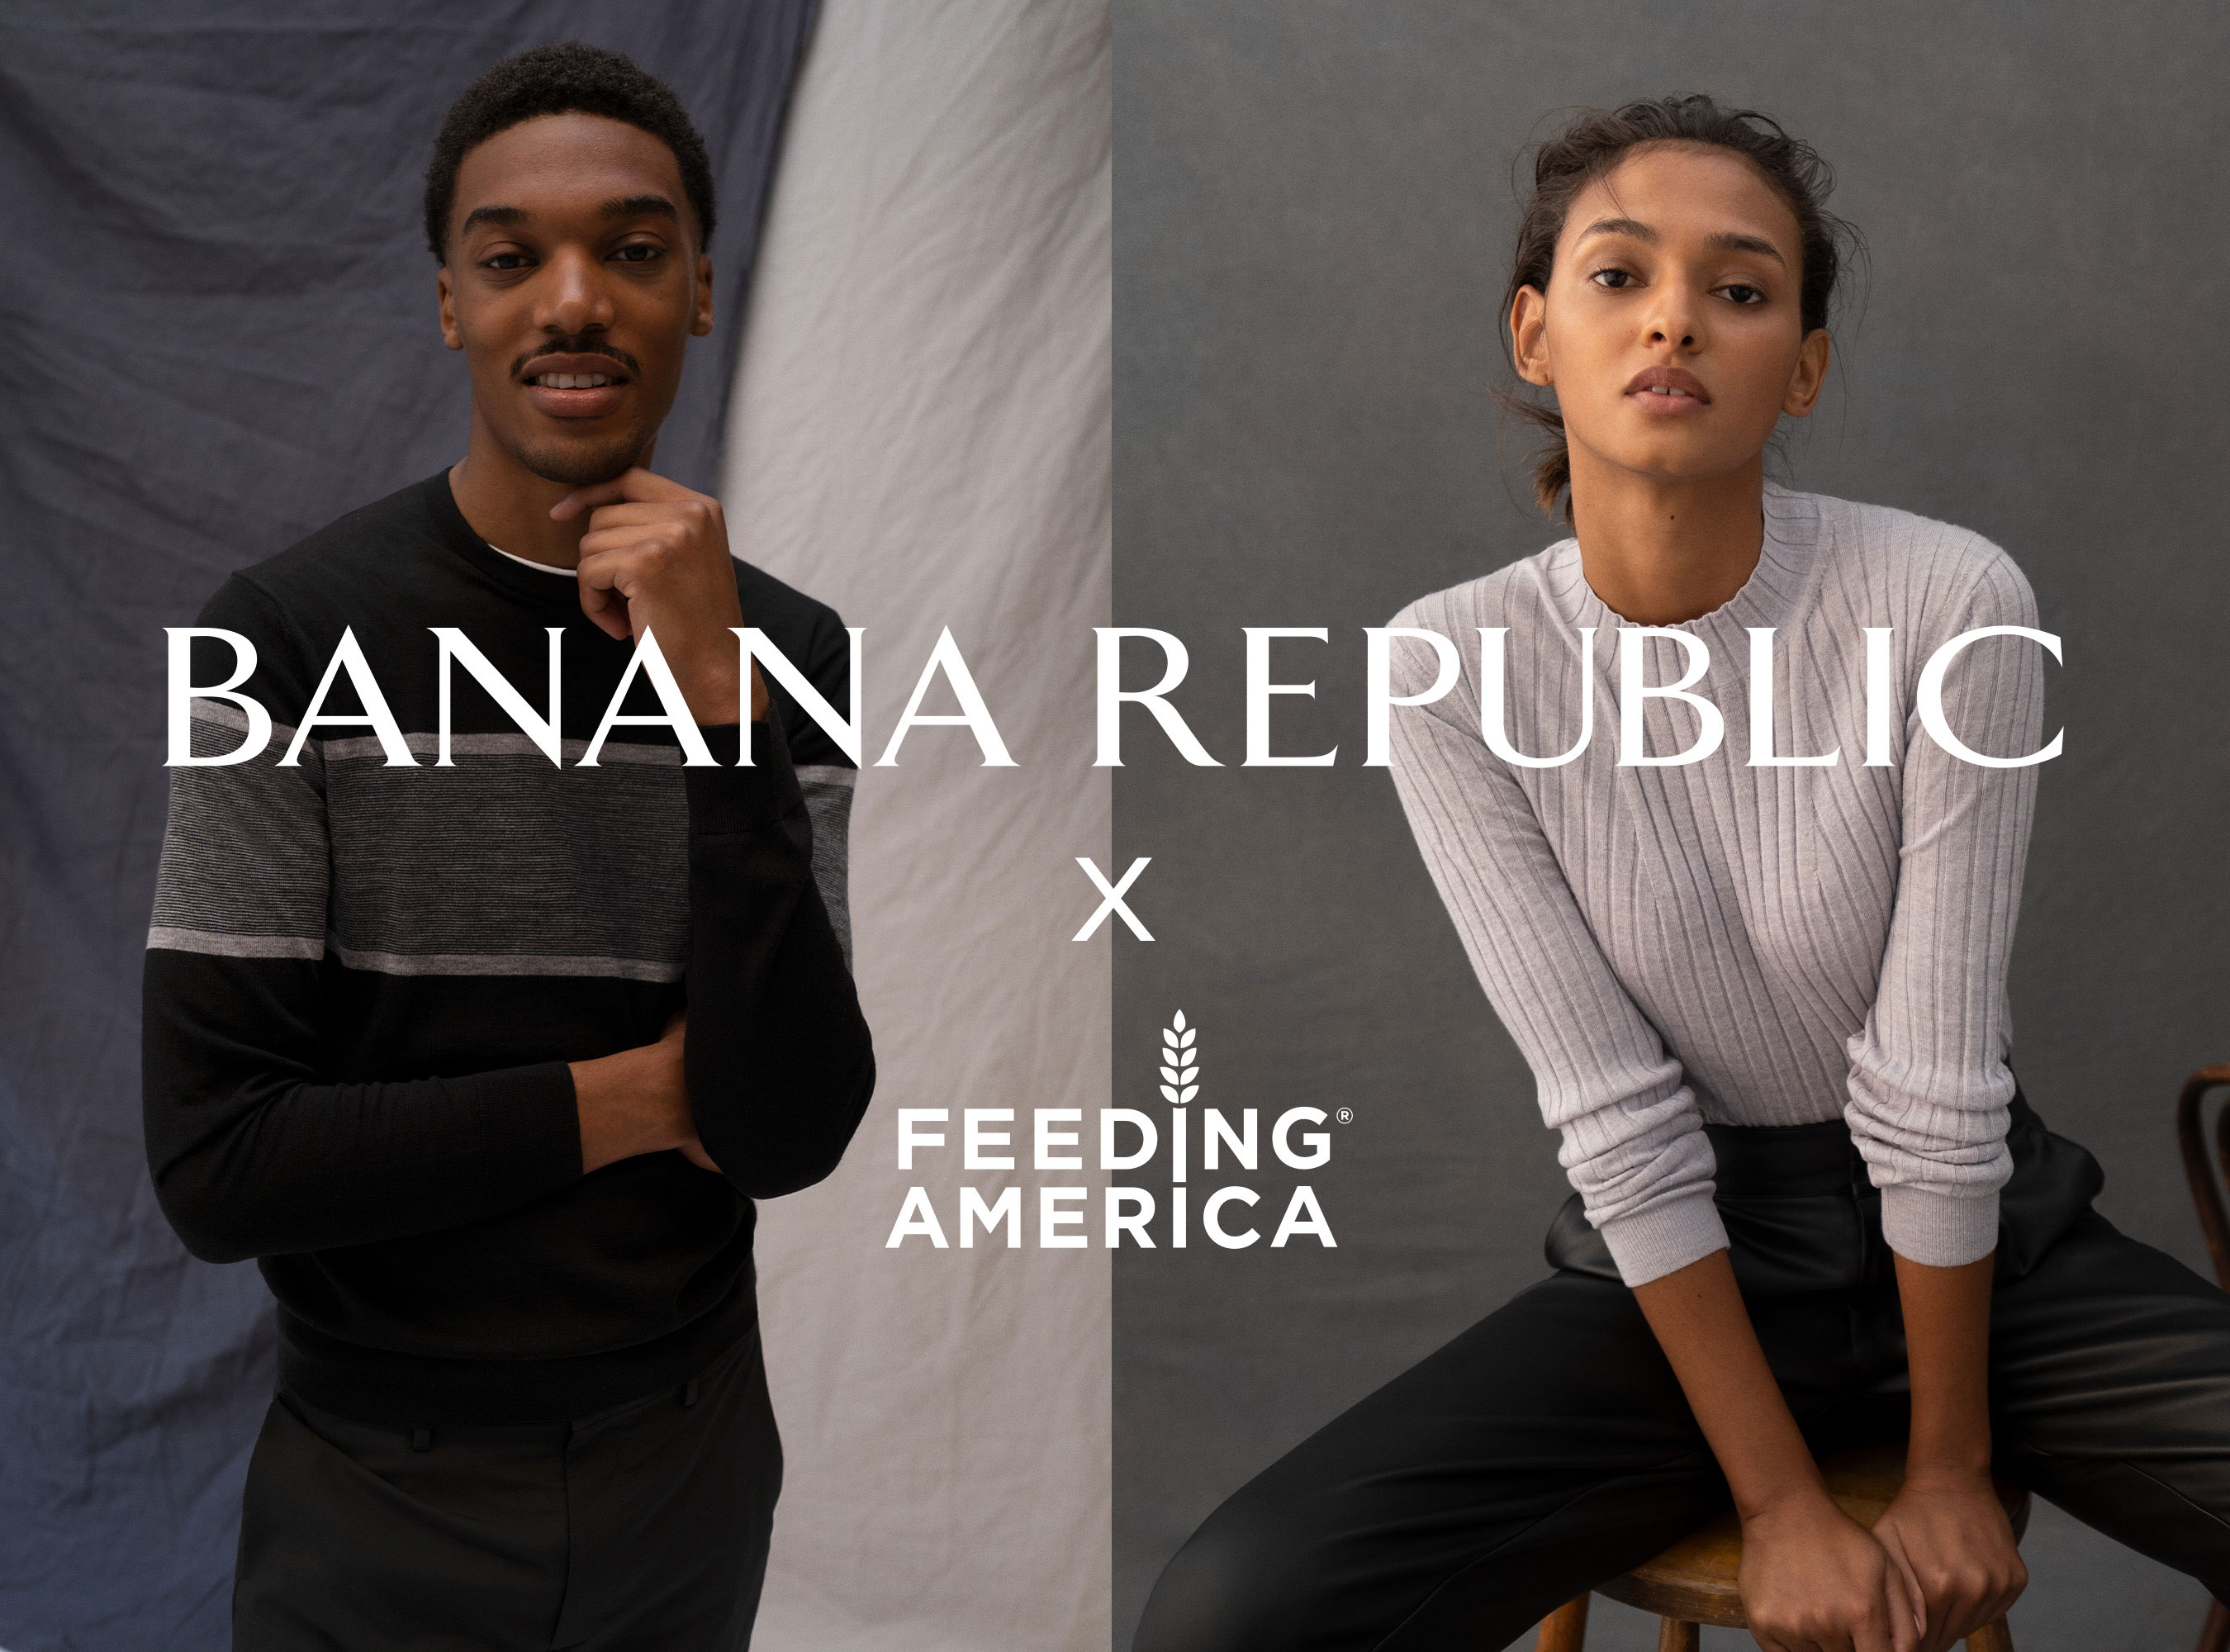 During the holiday season of giving thanks, Banana Republic continues its pledge to work for a Better Republic by furthering its partnership with Feeding America® and will donate $10 from the sale of every Banana Republic sweater, up to $25,000 total, to Feeding America® on Giving Tuesday, December 1, 2020.